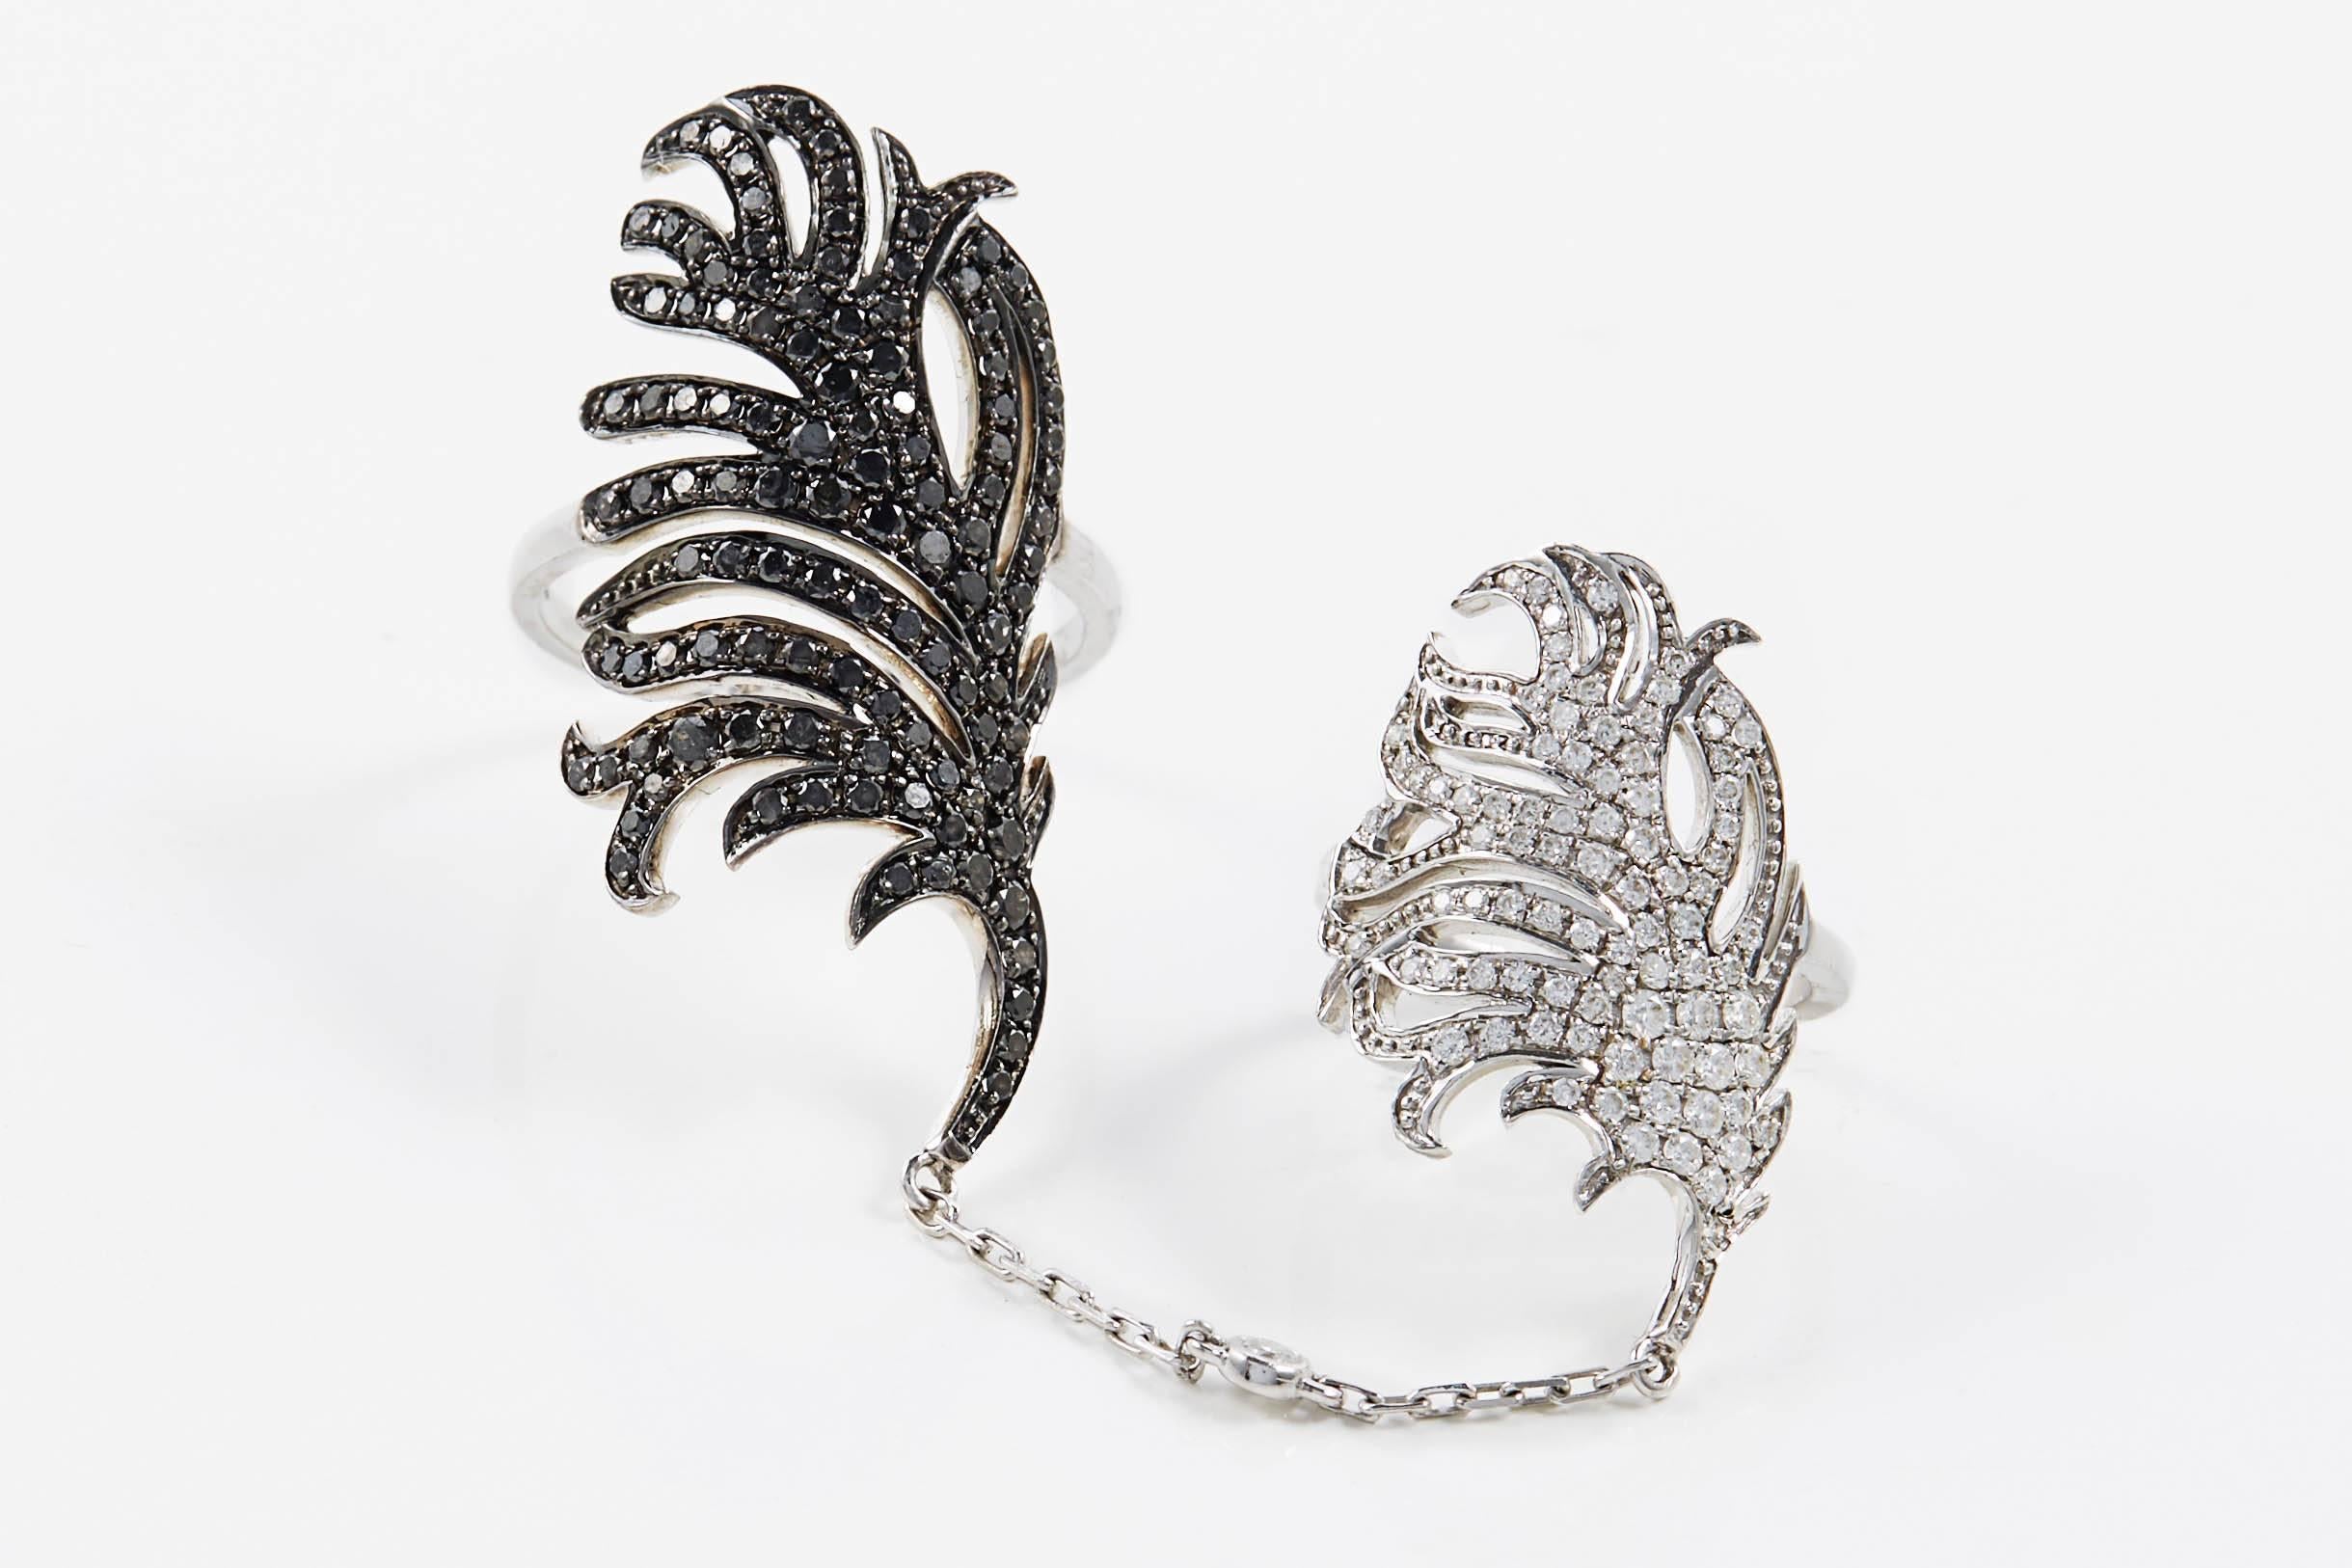 SAM.SAAB feather motif chain ring in 18k white gold with 1.72cts white and black diamonds in size 6. Re-sizable